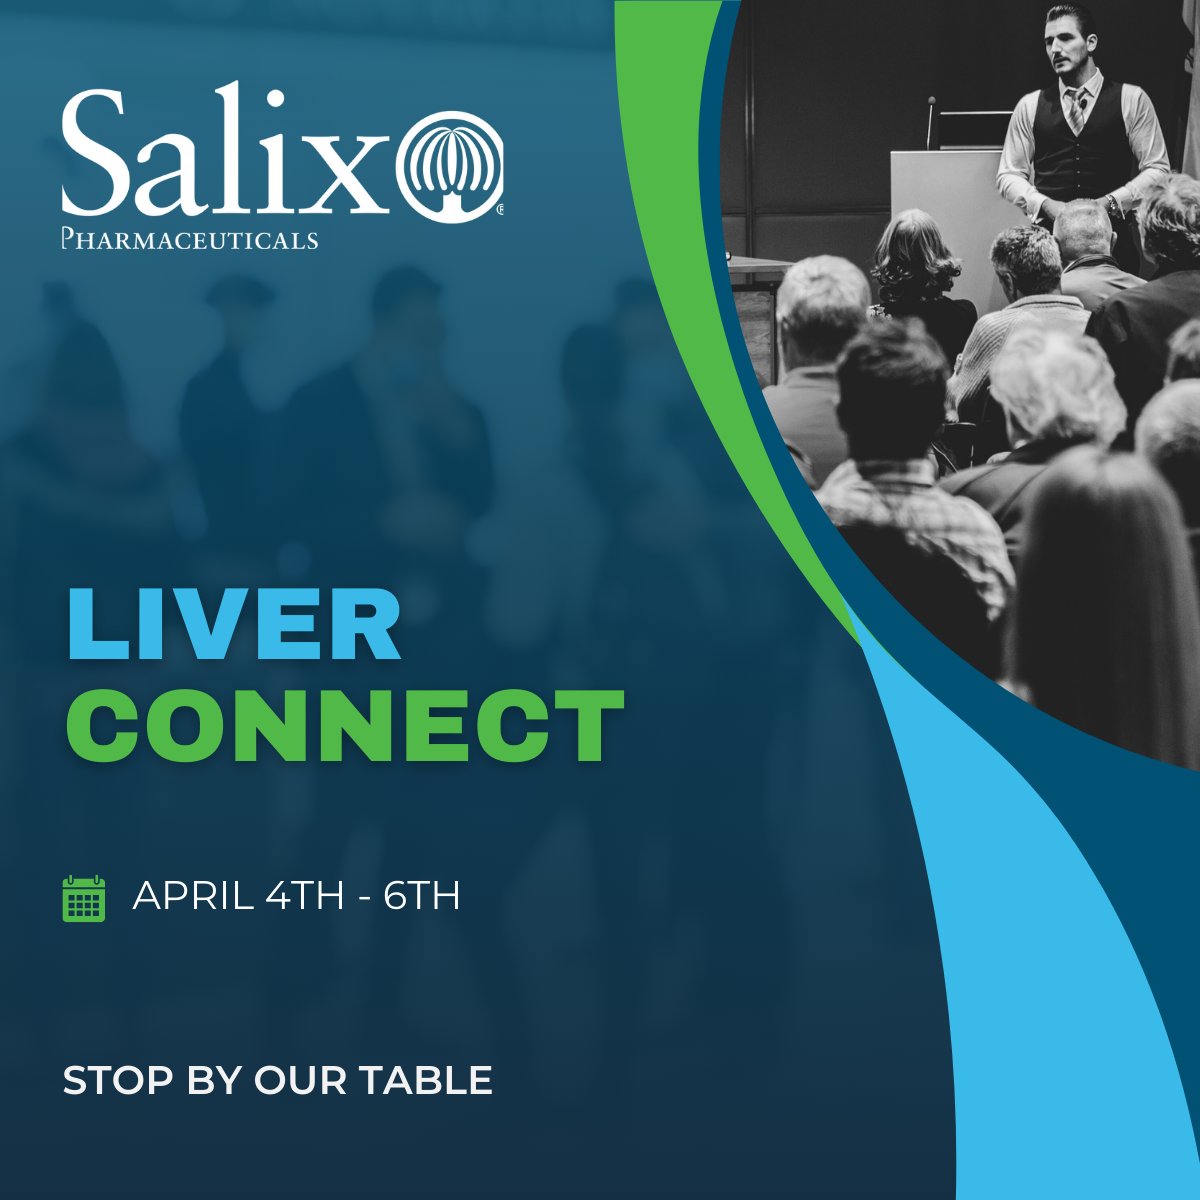 We share the same passion for liver disease research and improved patient outcomes as @CLDFoundation, which is why we are excited to attend the premier Liver Connect Conference and network with key opinion leaders. If you're at the meeting, stop at our table.